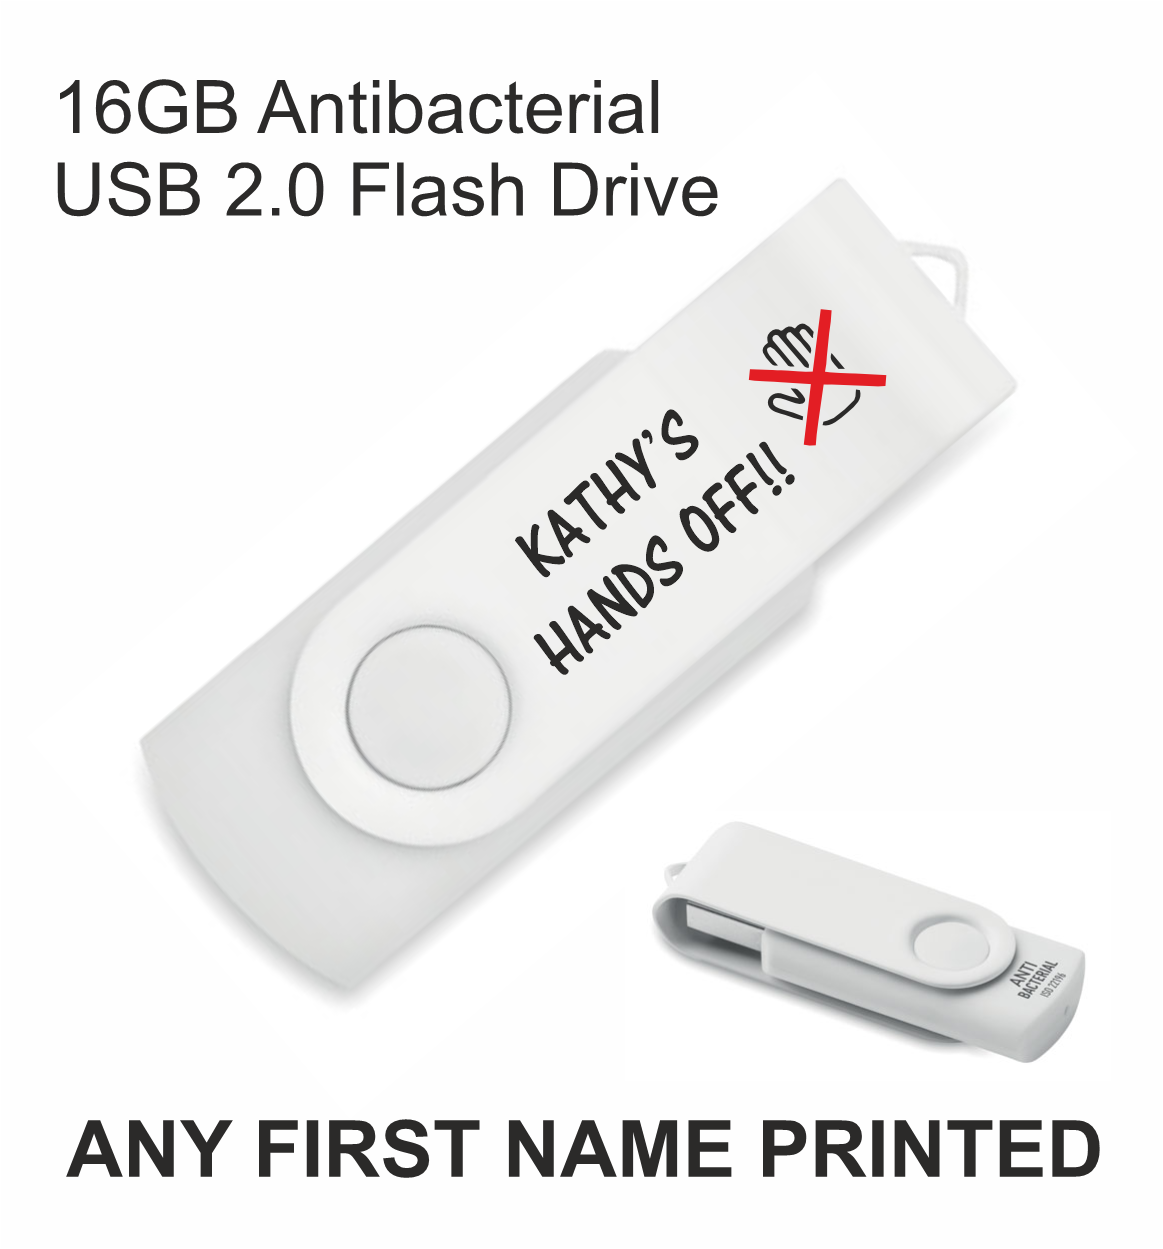 Antibacterial personalised 16GB USB Flash Drive ANY FIRST NAME PRINTED